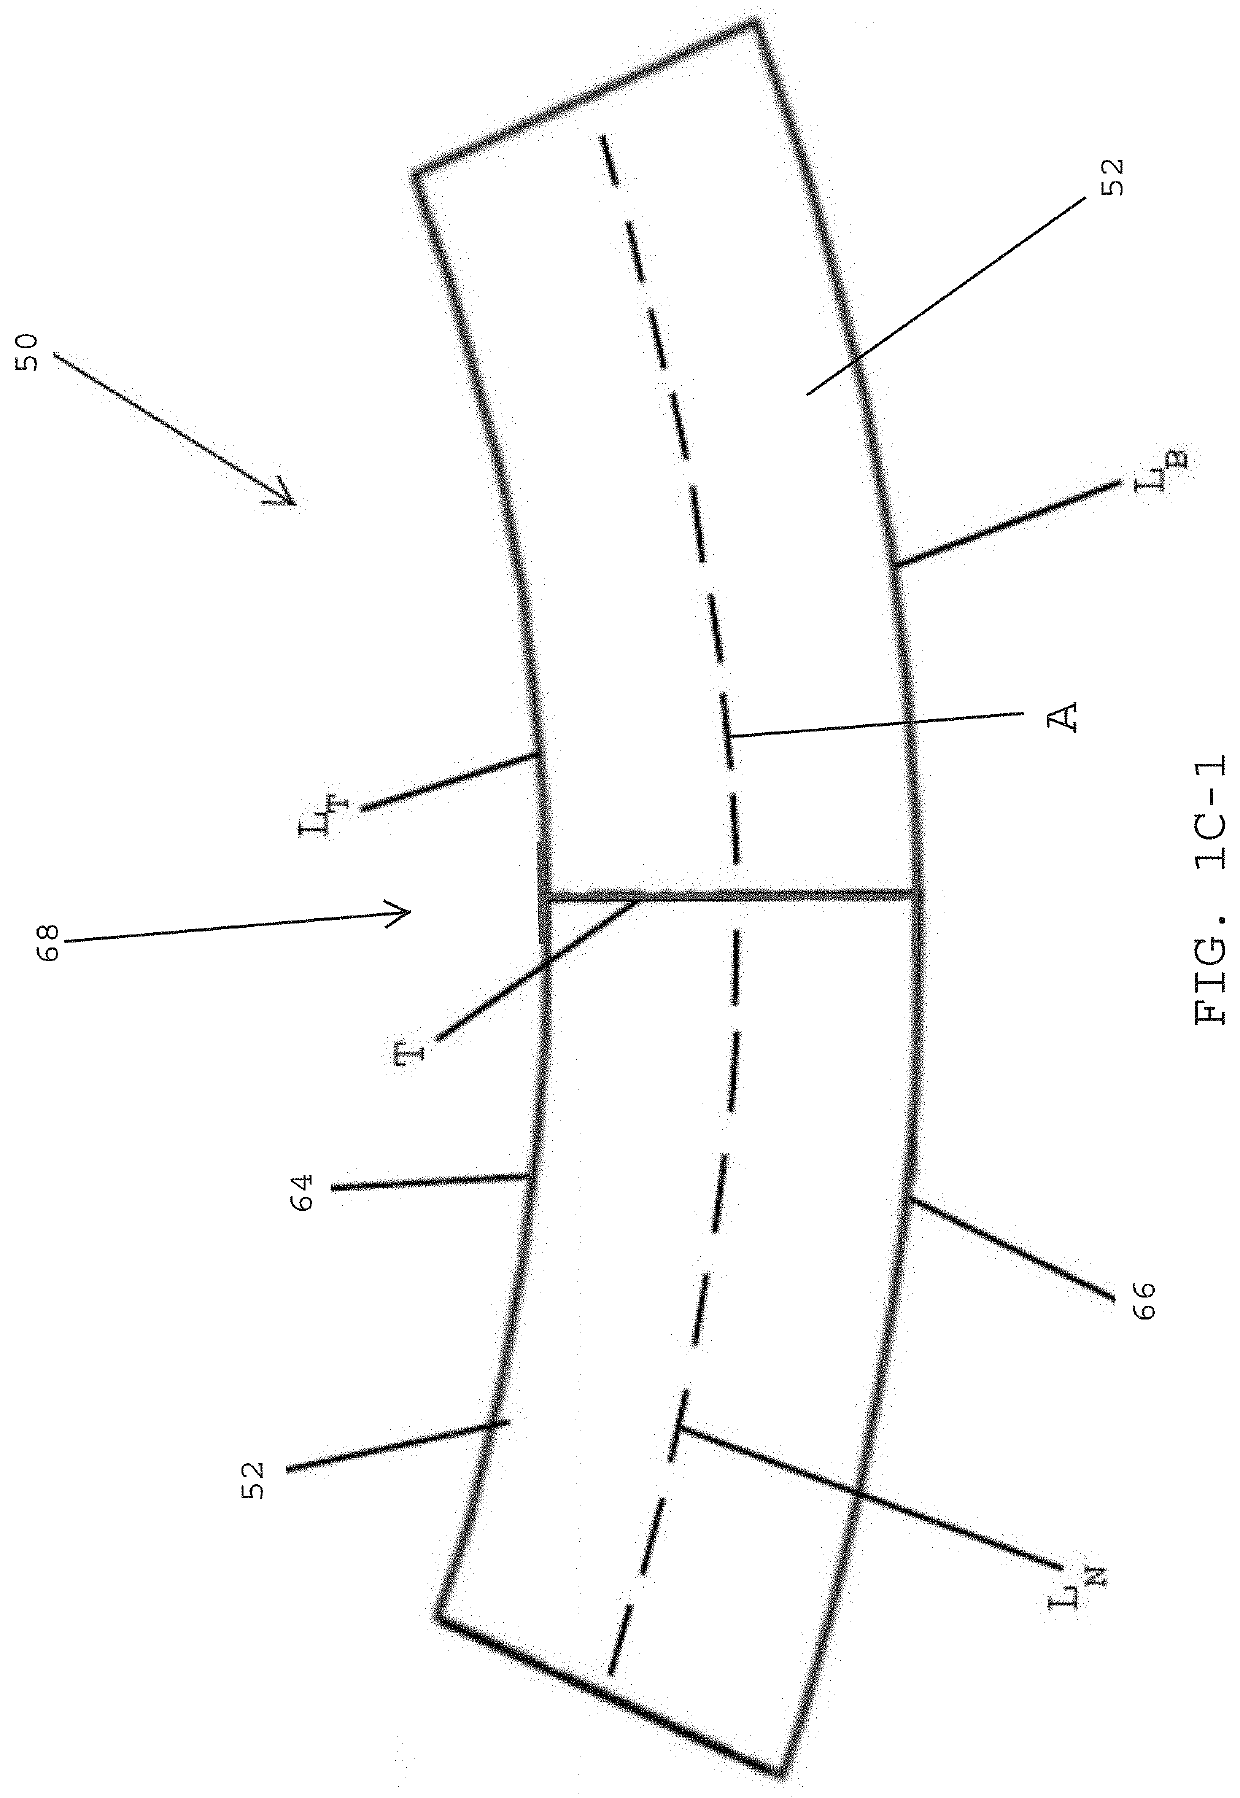 Composite suture needles having elastically deformable sections